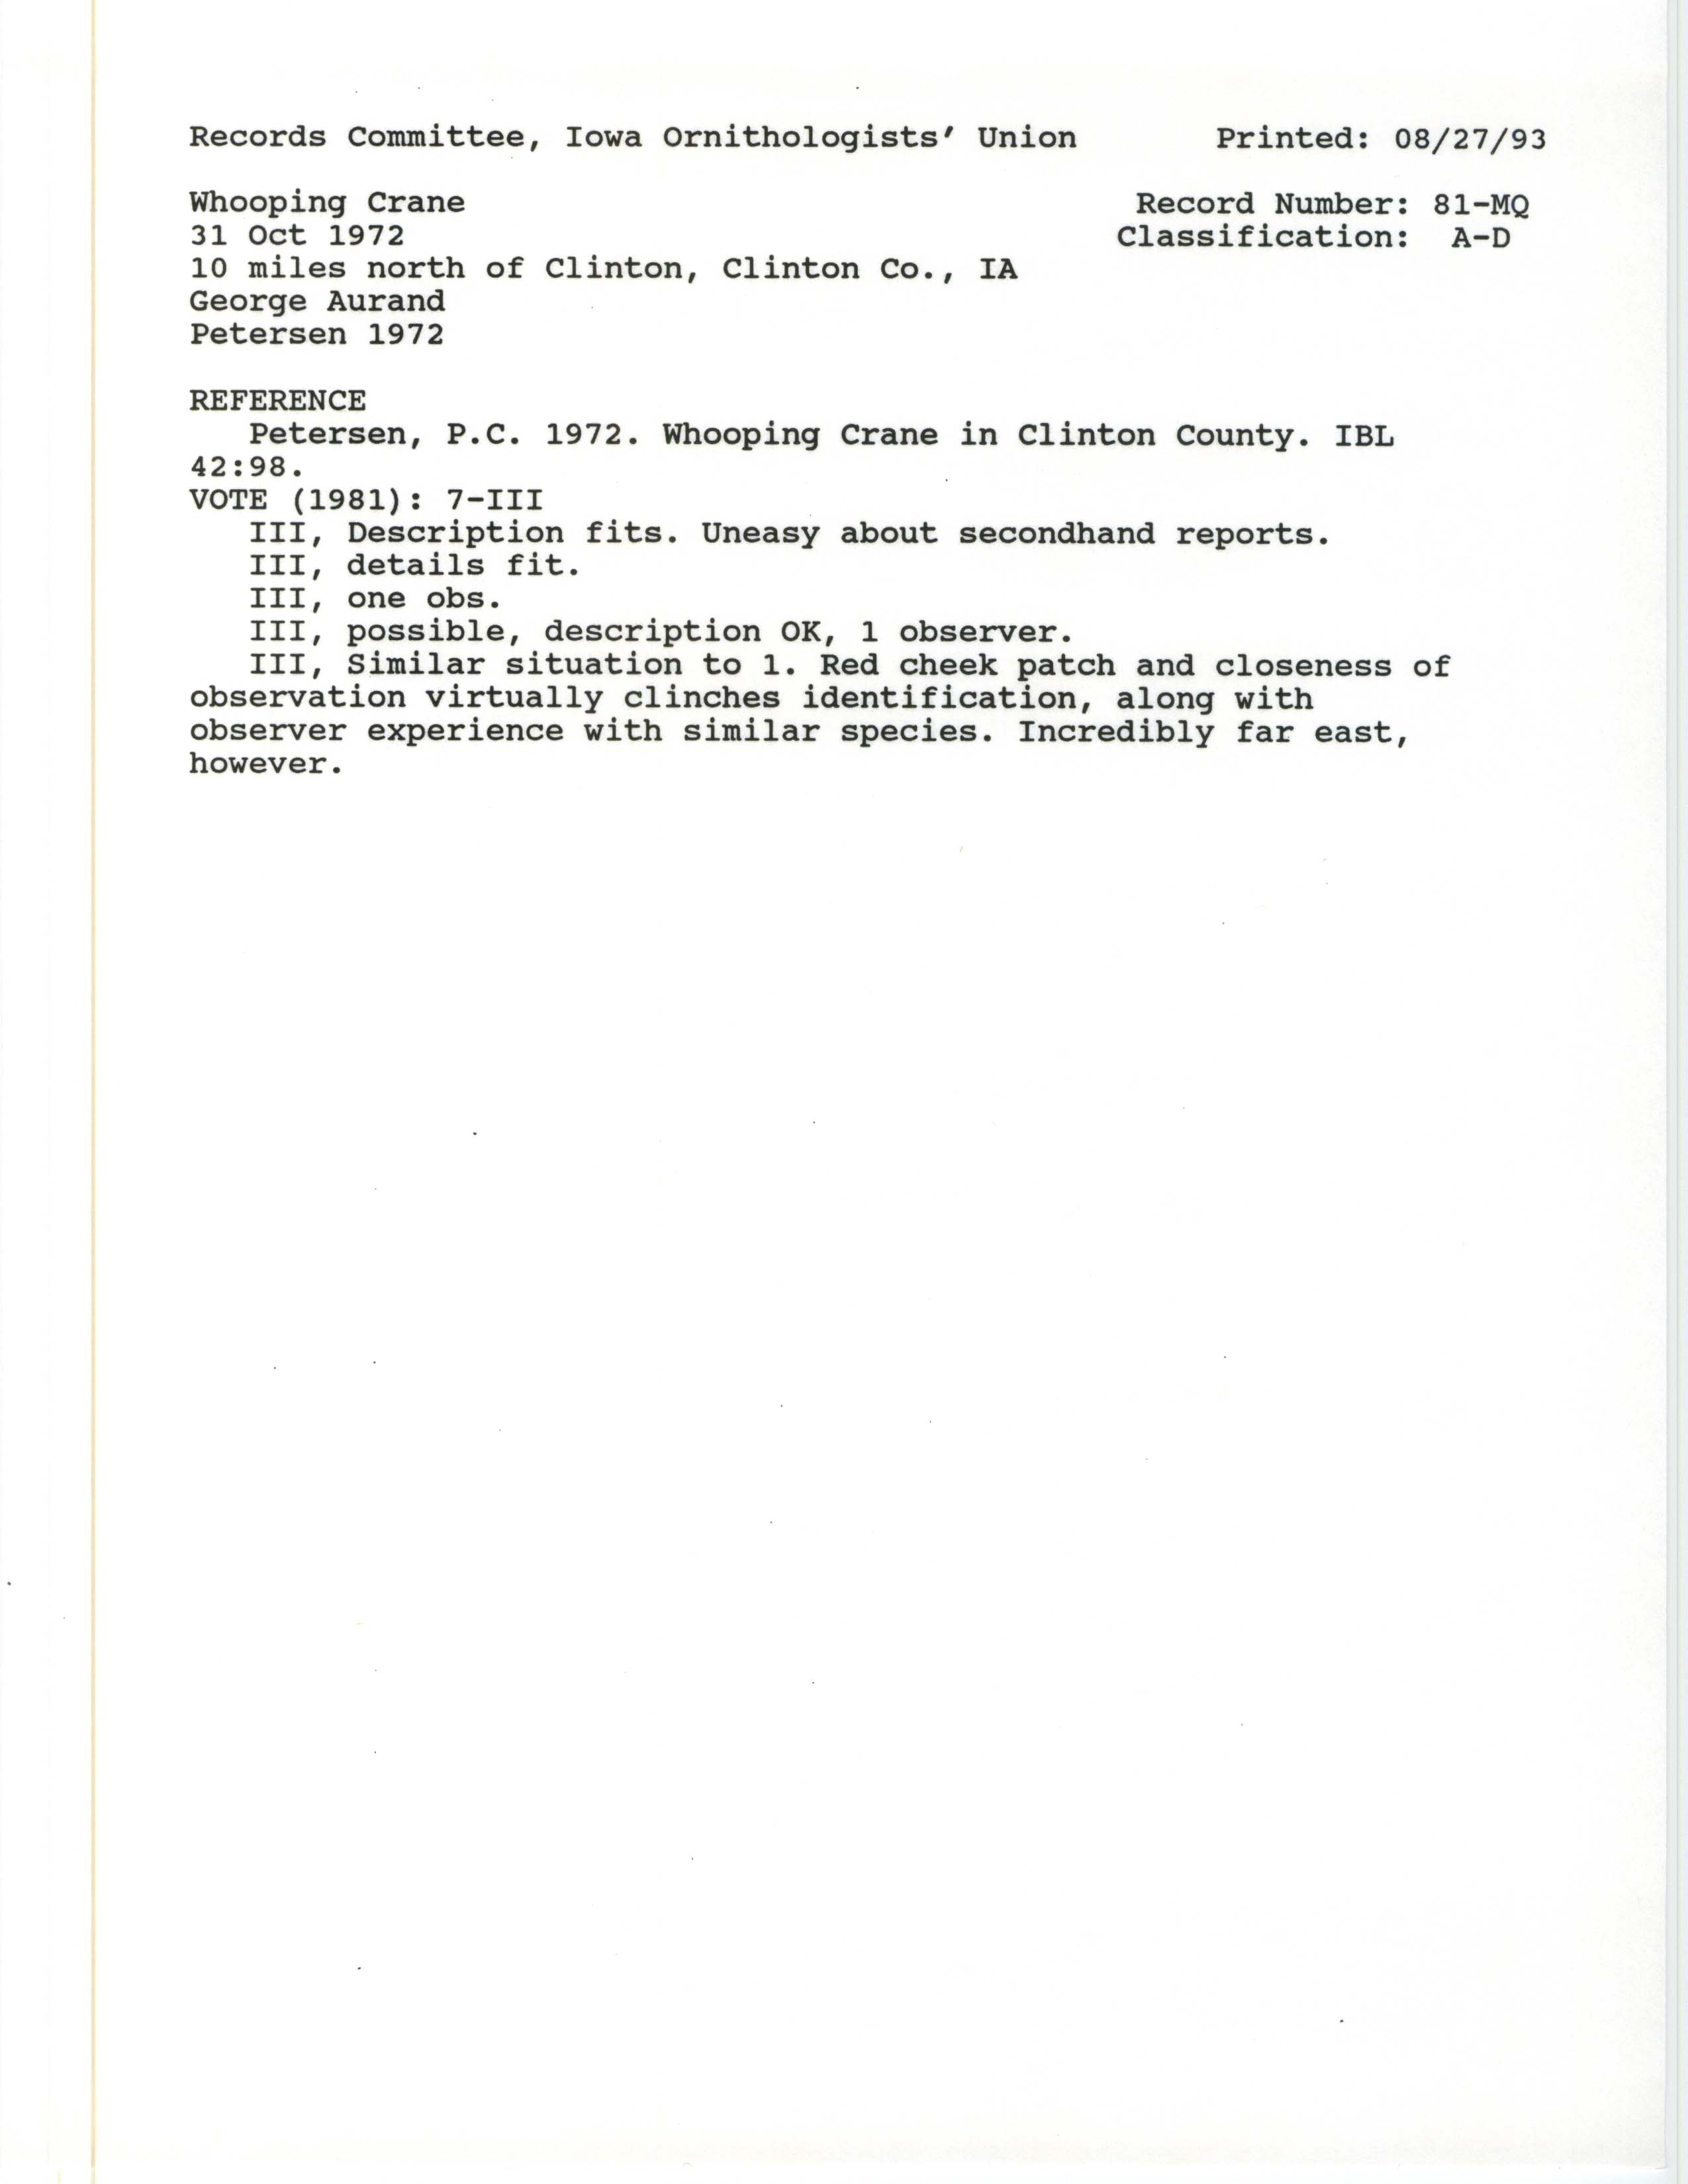 Records Committee review for rare bird sighting for Whooping Crane north of Clinton, 1972